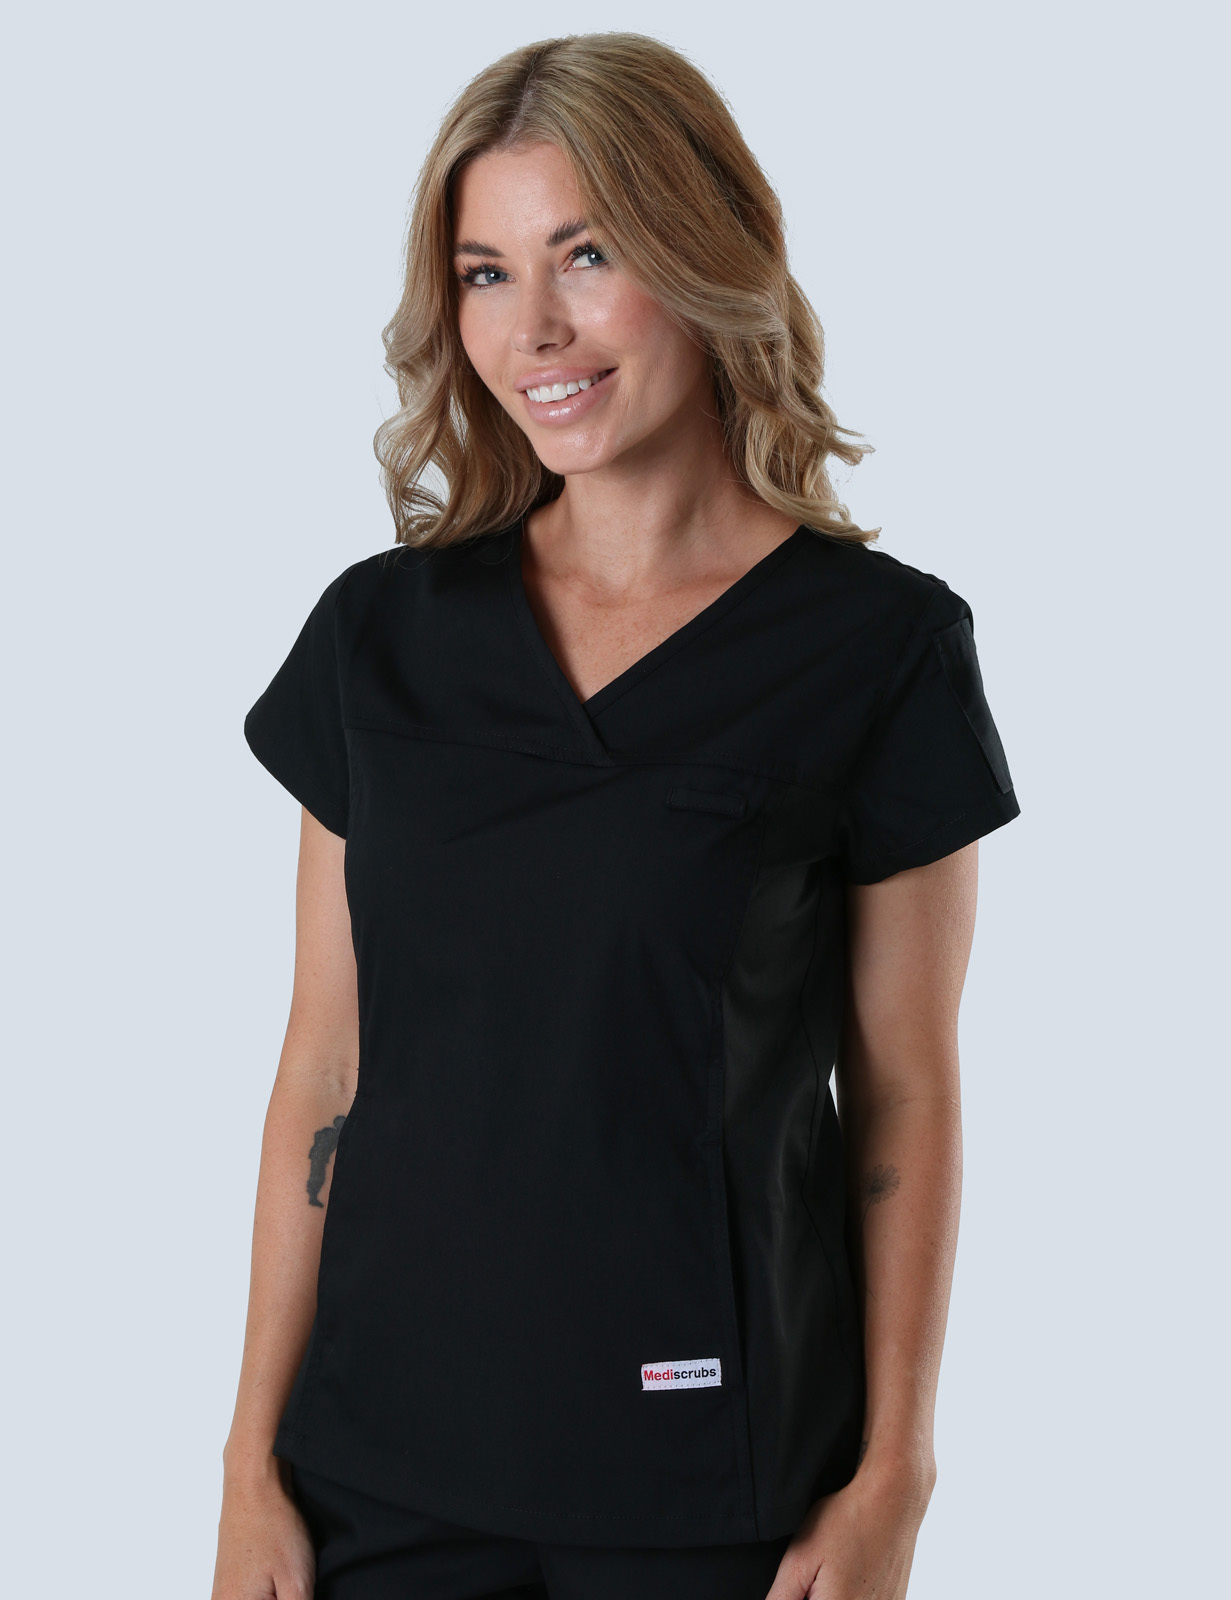 Women's Fit Solid Scrub Top With Spandex Panel - Black - Medium